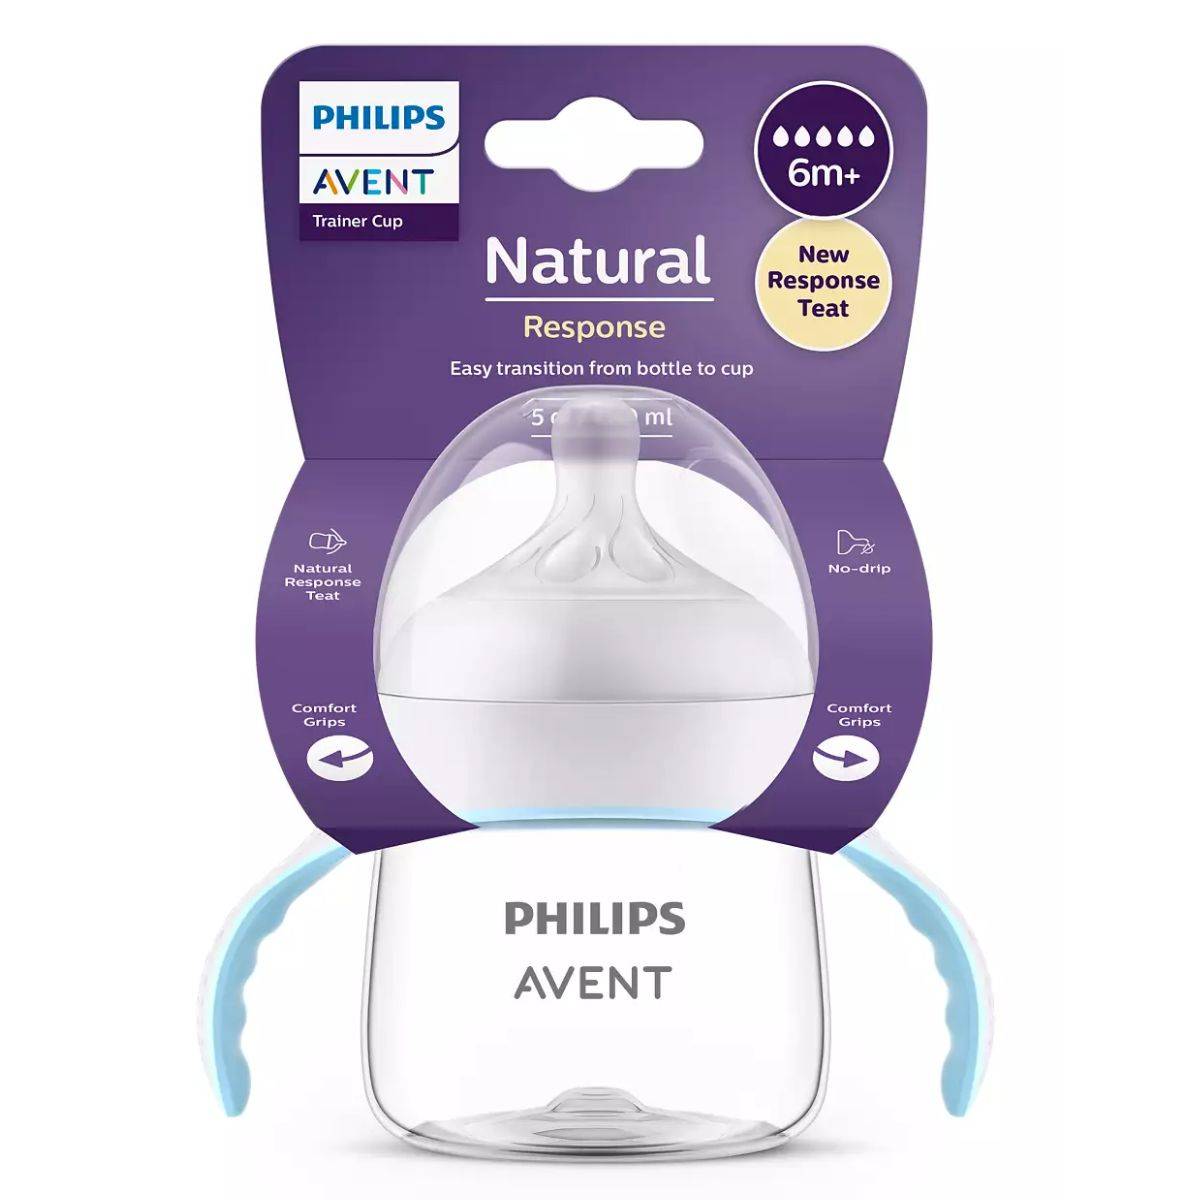 https://www.maxxidiscount.com/38814-large_default/philips-avent-natural-response-trainer-cup-150ml.jpg